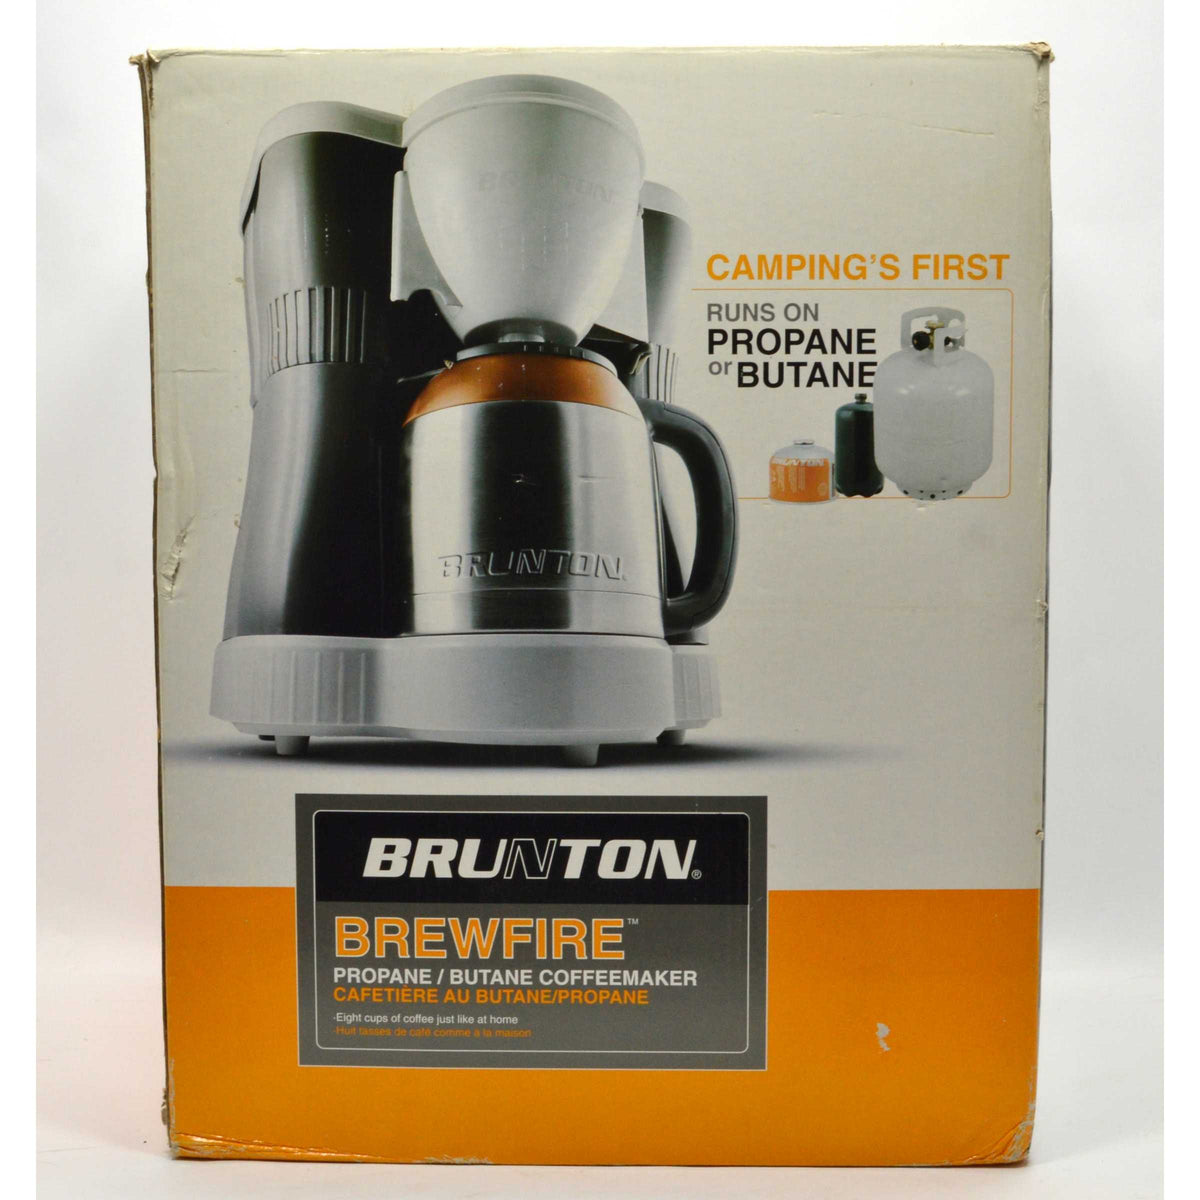 New-Open Box BRUTON BREWFIRE Butane or Propane CAMPING COFFEEMAKER 8 –  Get A Grip & More